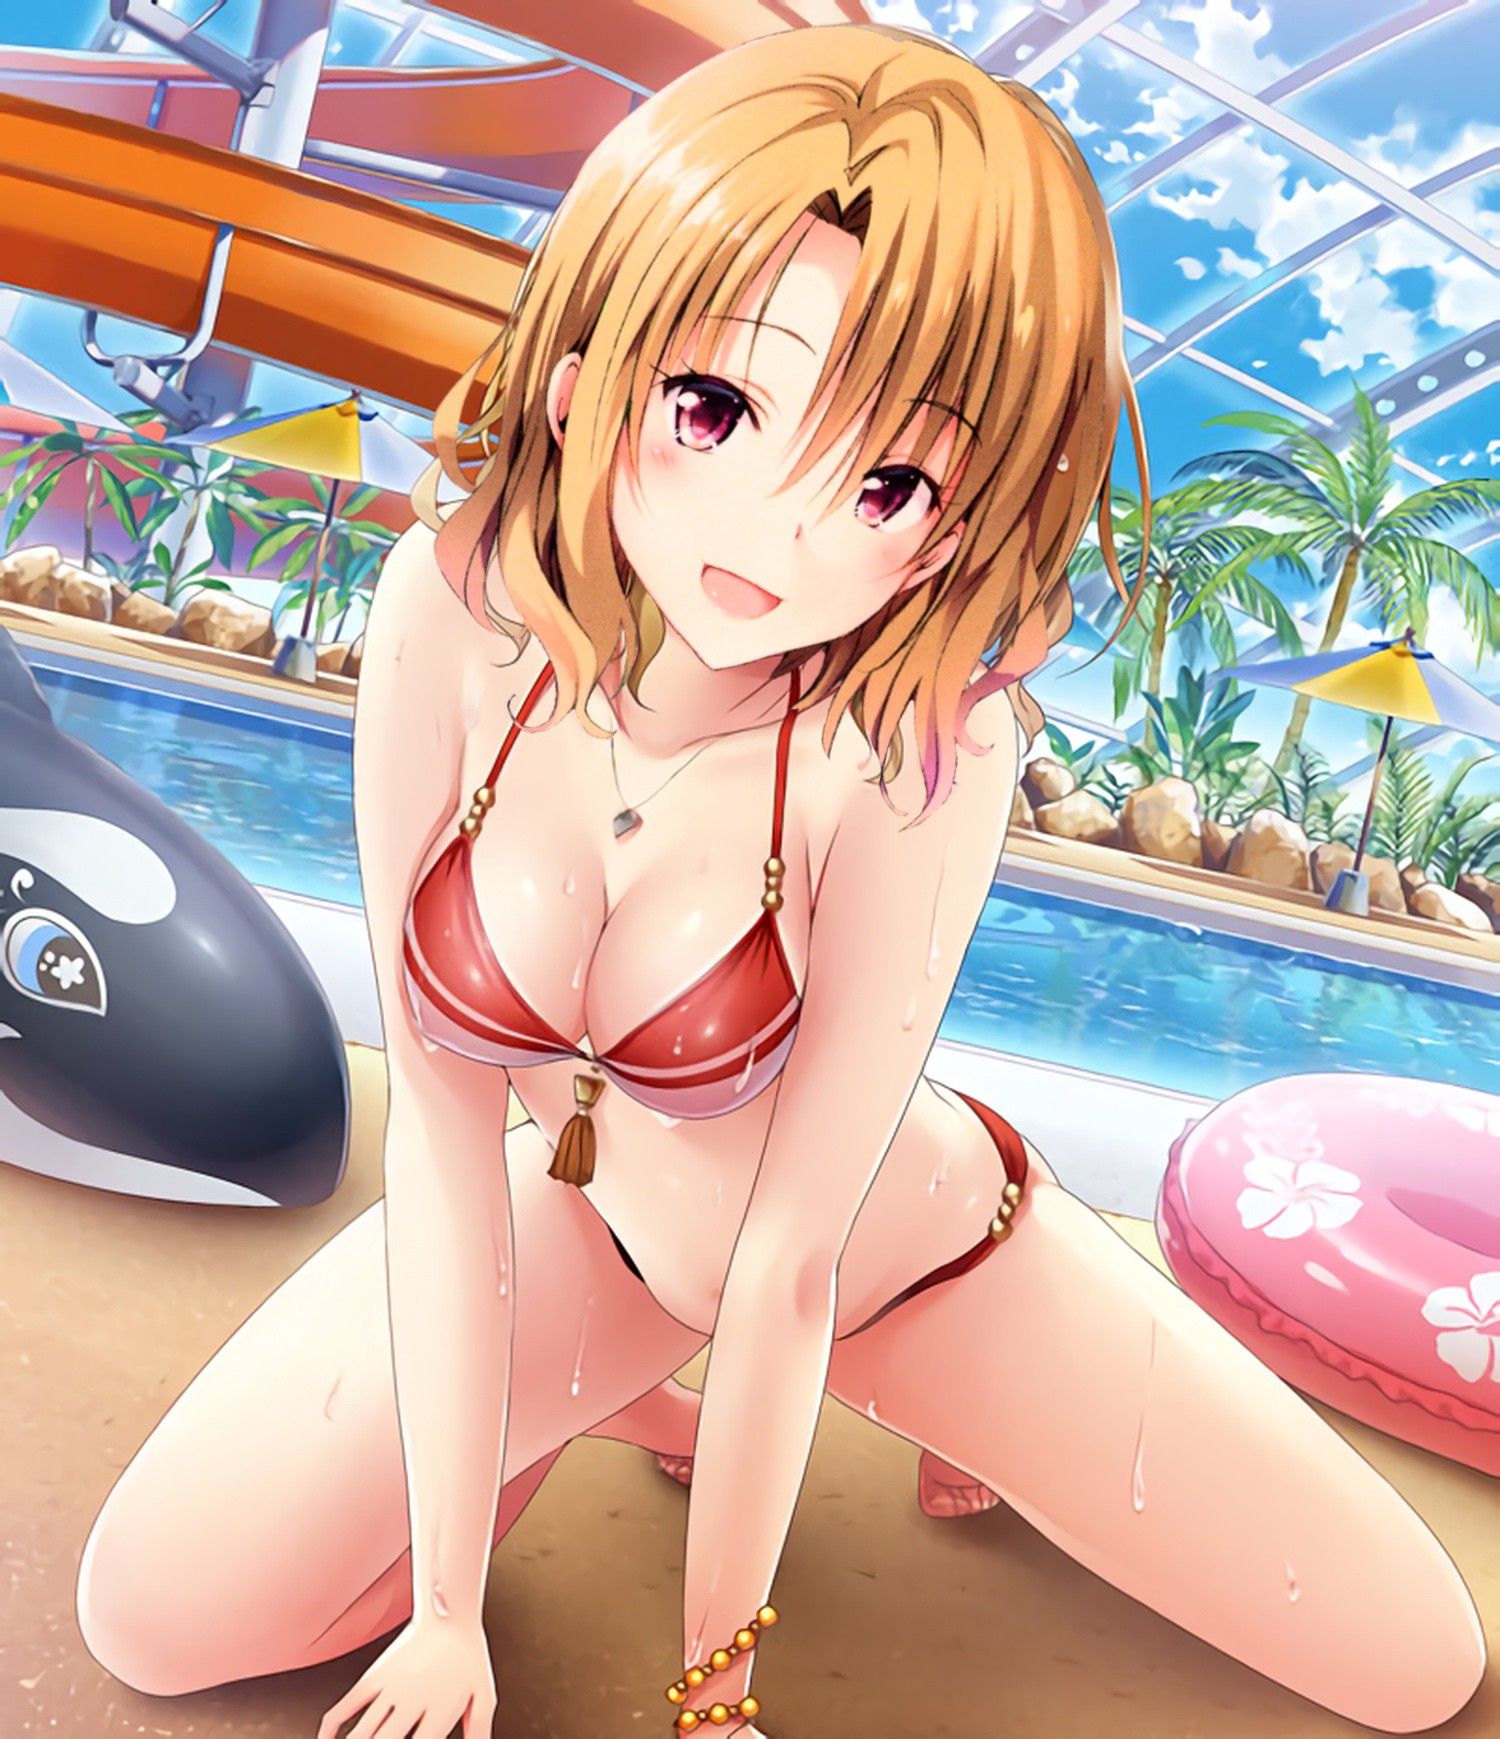 [2nd] secondary image of a cool girl wearing a swimsuit part 4 [non-erotic swimsuit] 26